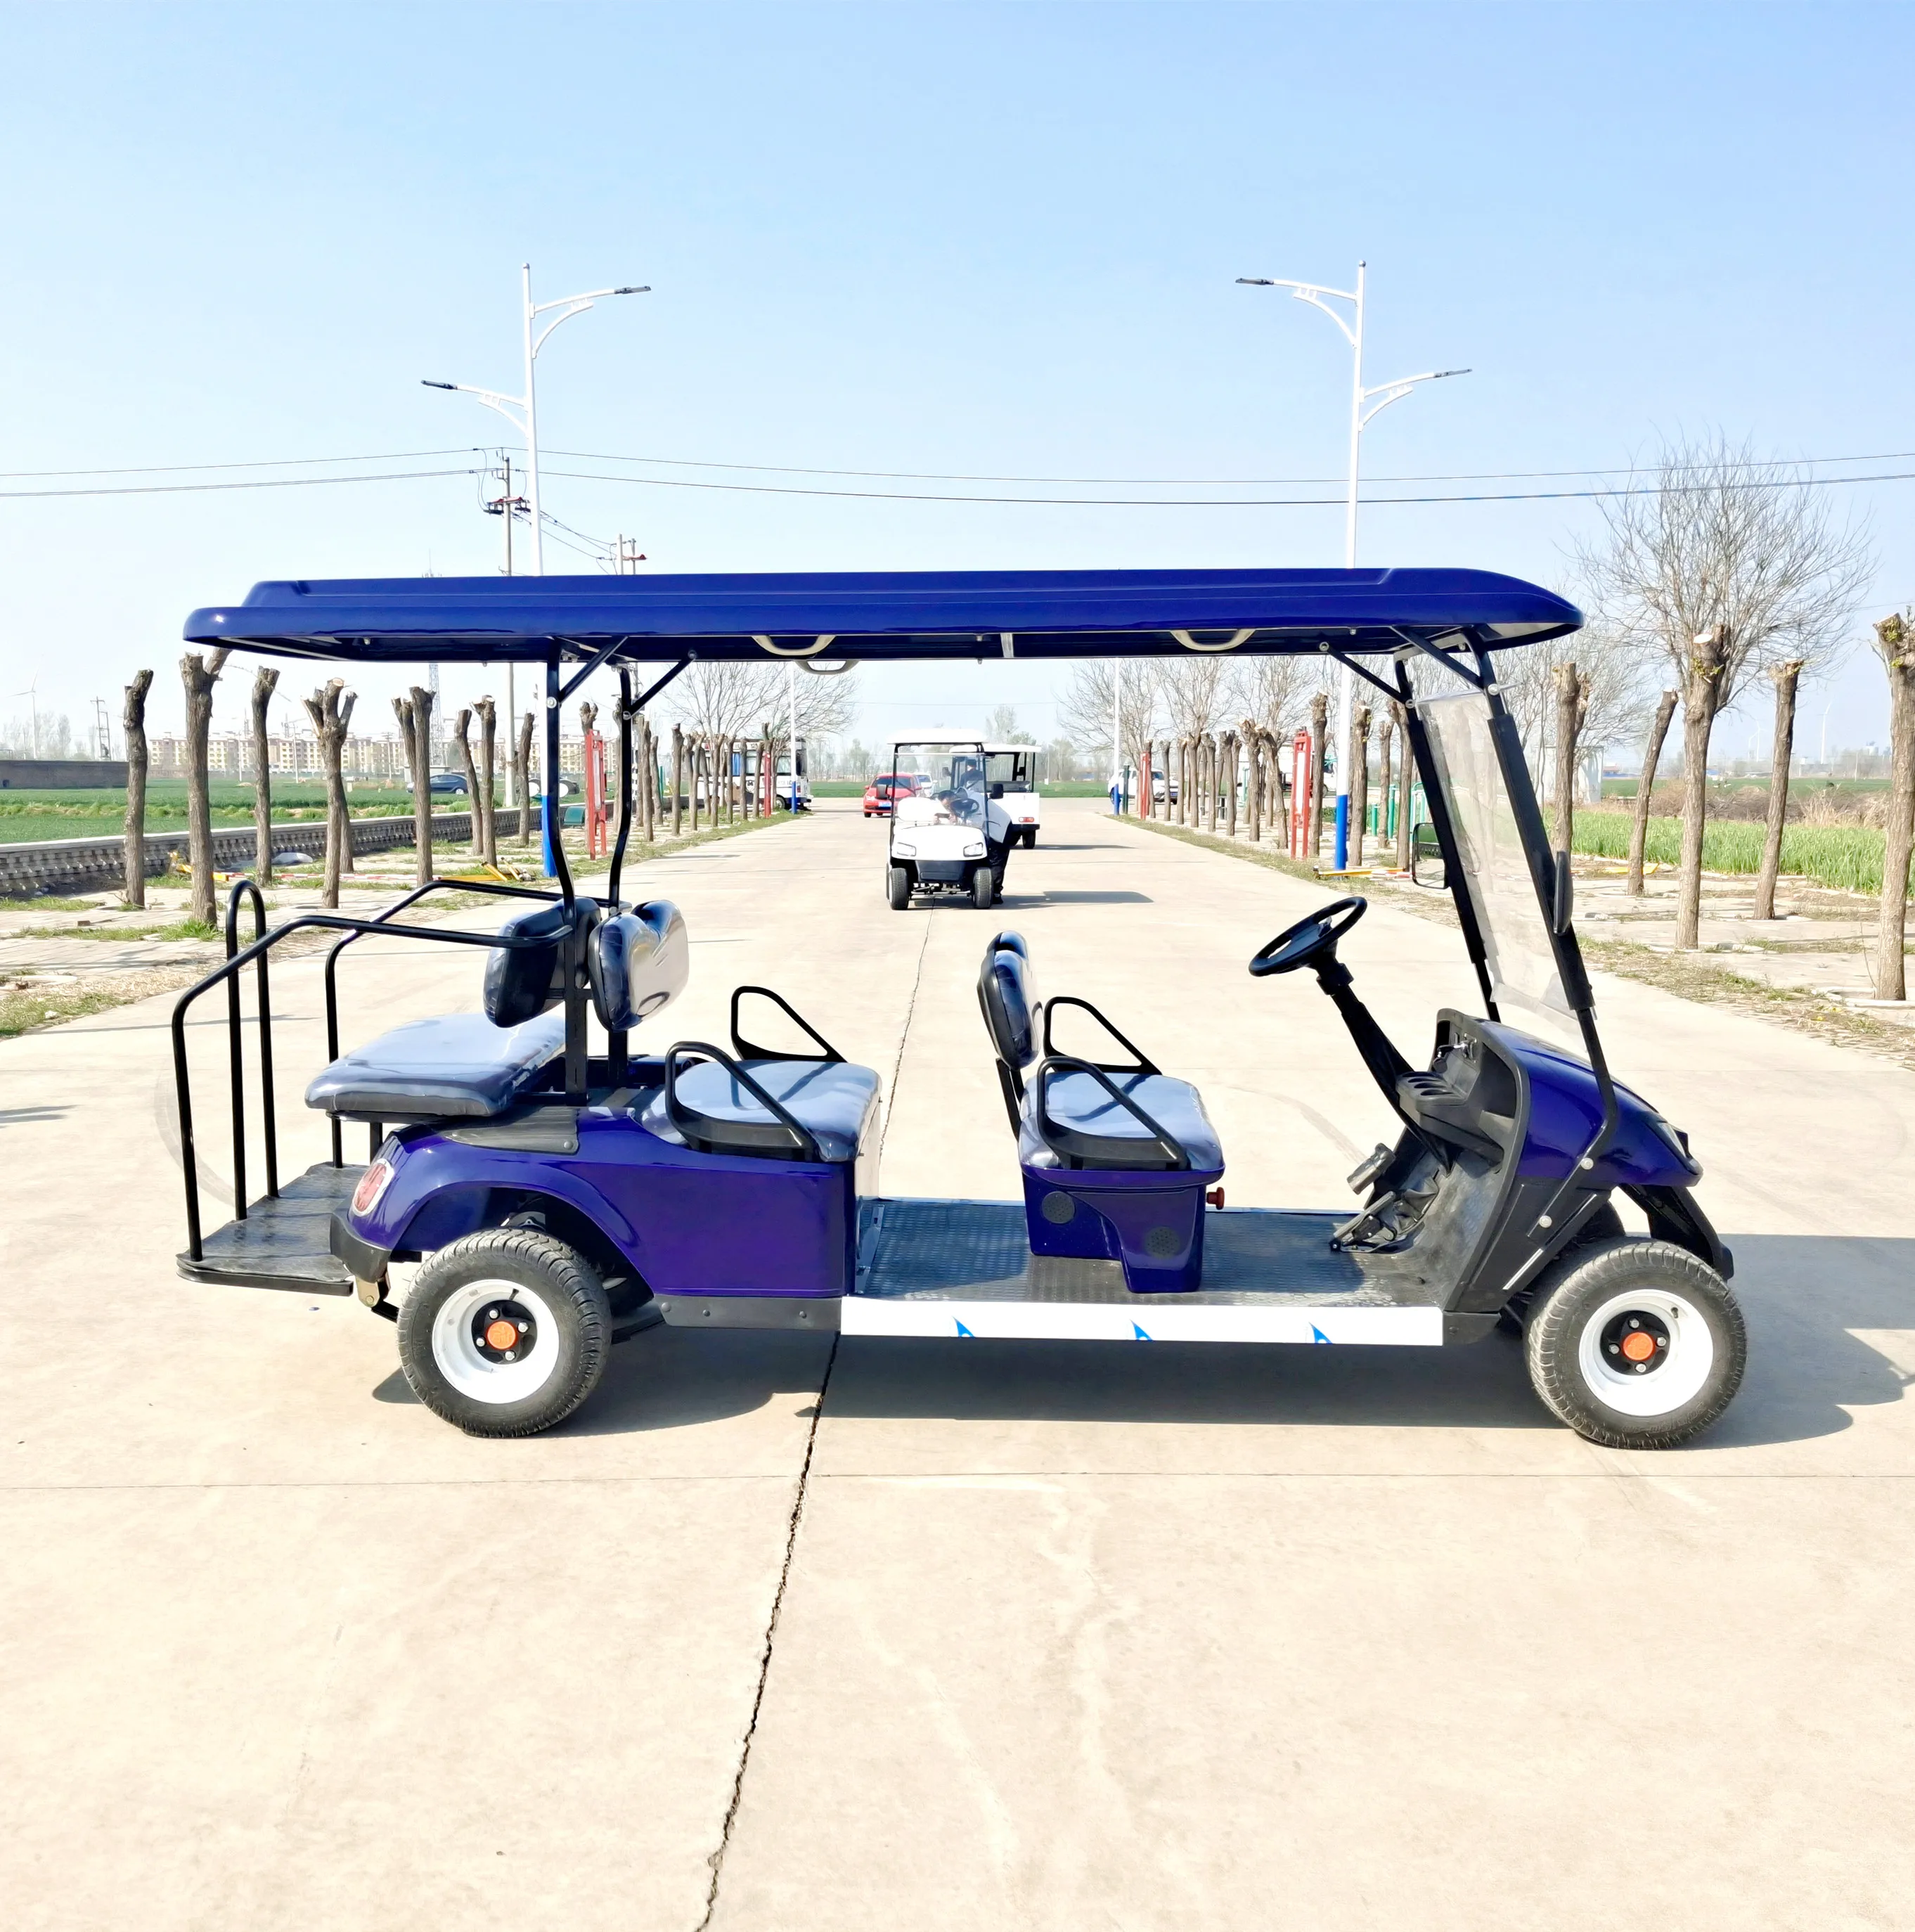 

2021 CE EEC Hot Sale Cheap 2-10 Seat Sightseeing Club Car Electric Golf Cart For Scenic Area/Amusement Park/Recreational Scooter